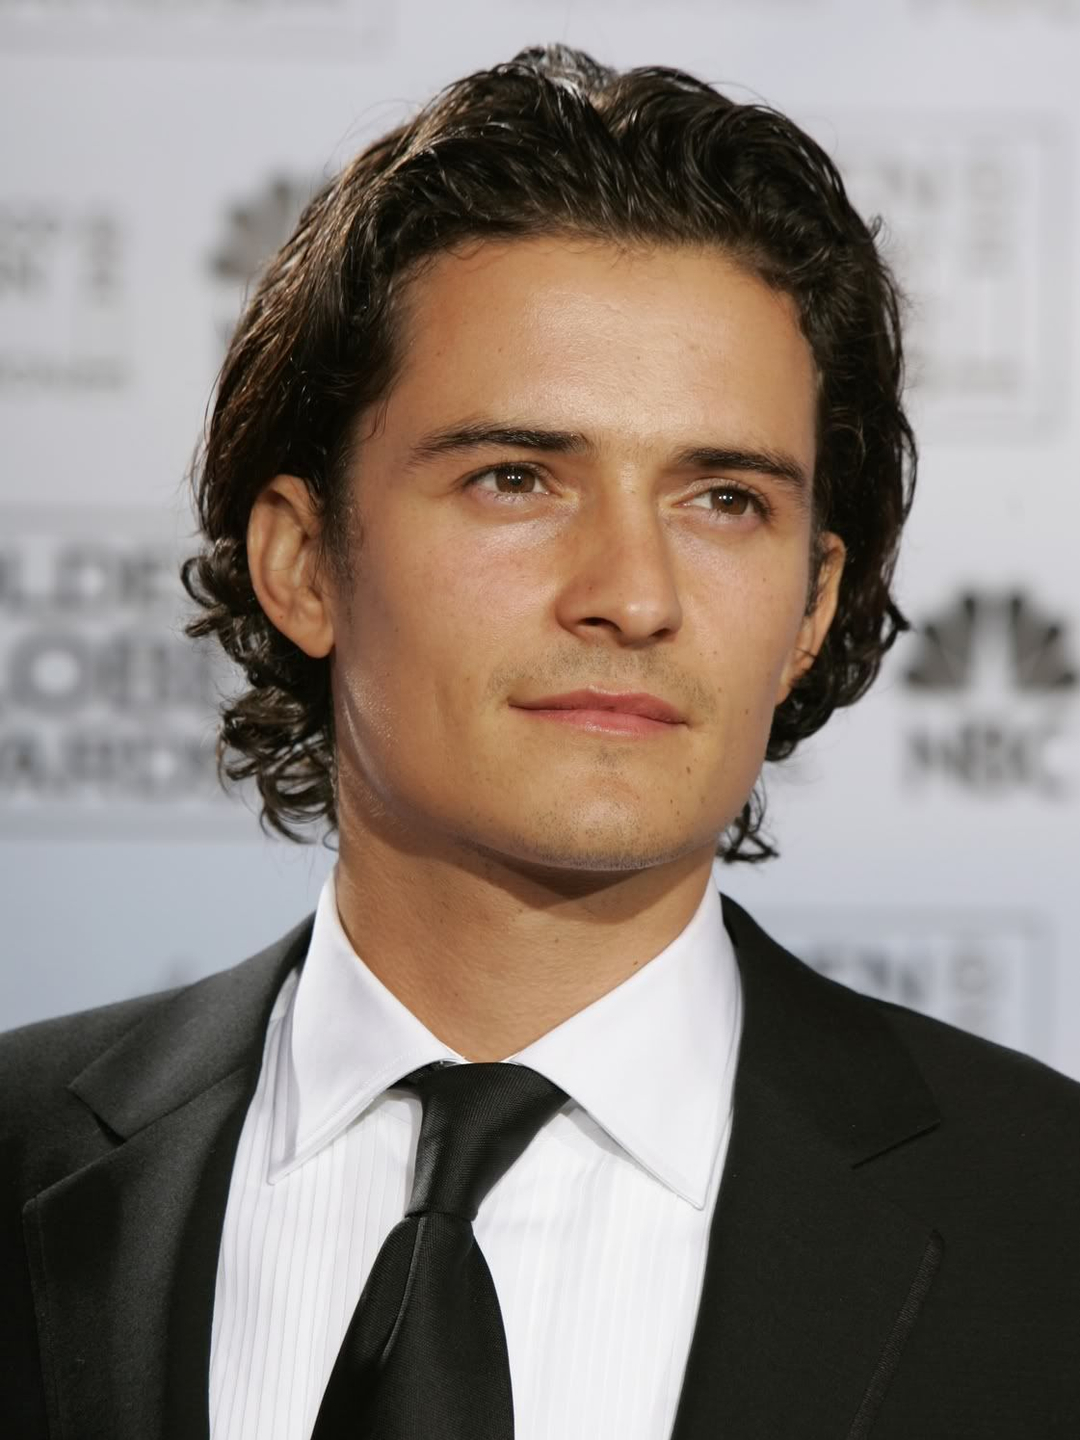 Orlando Bloom who is he